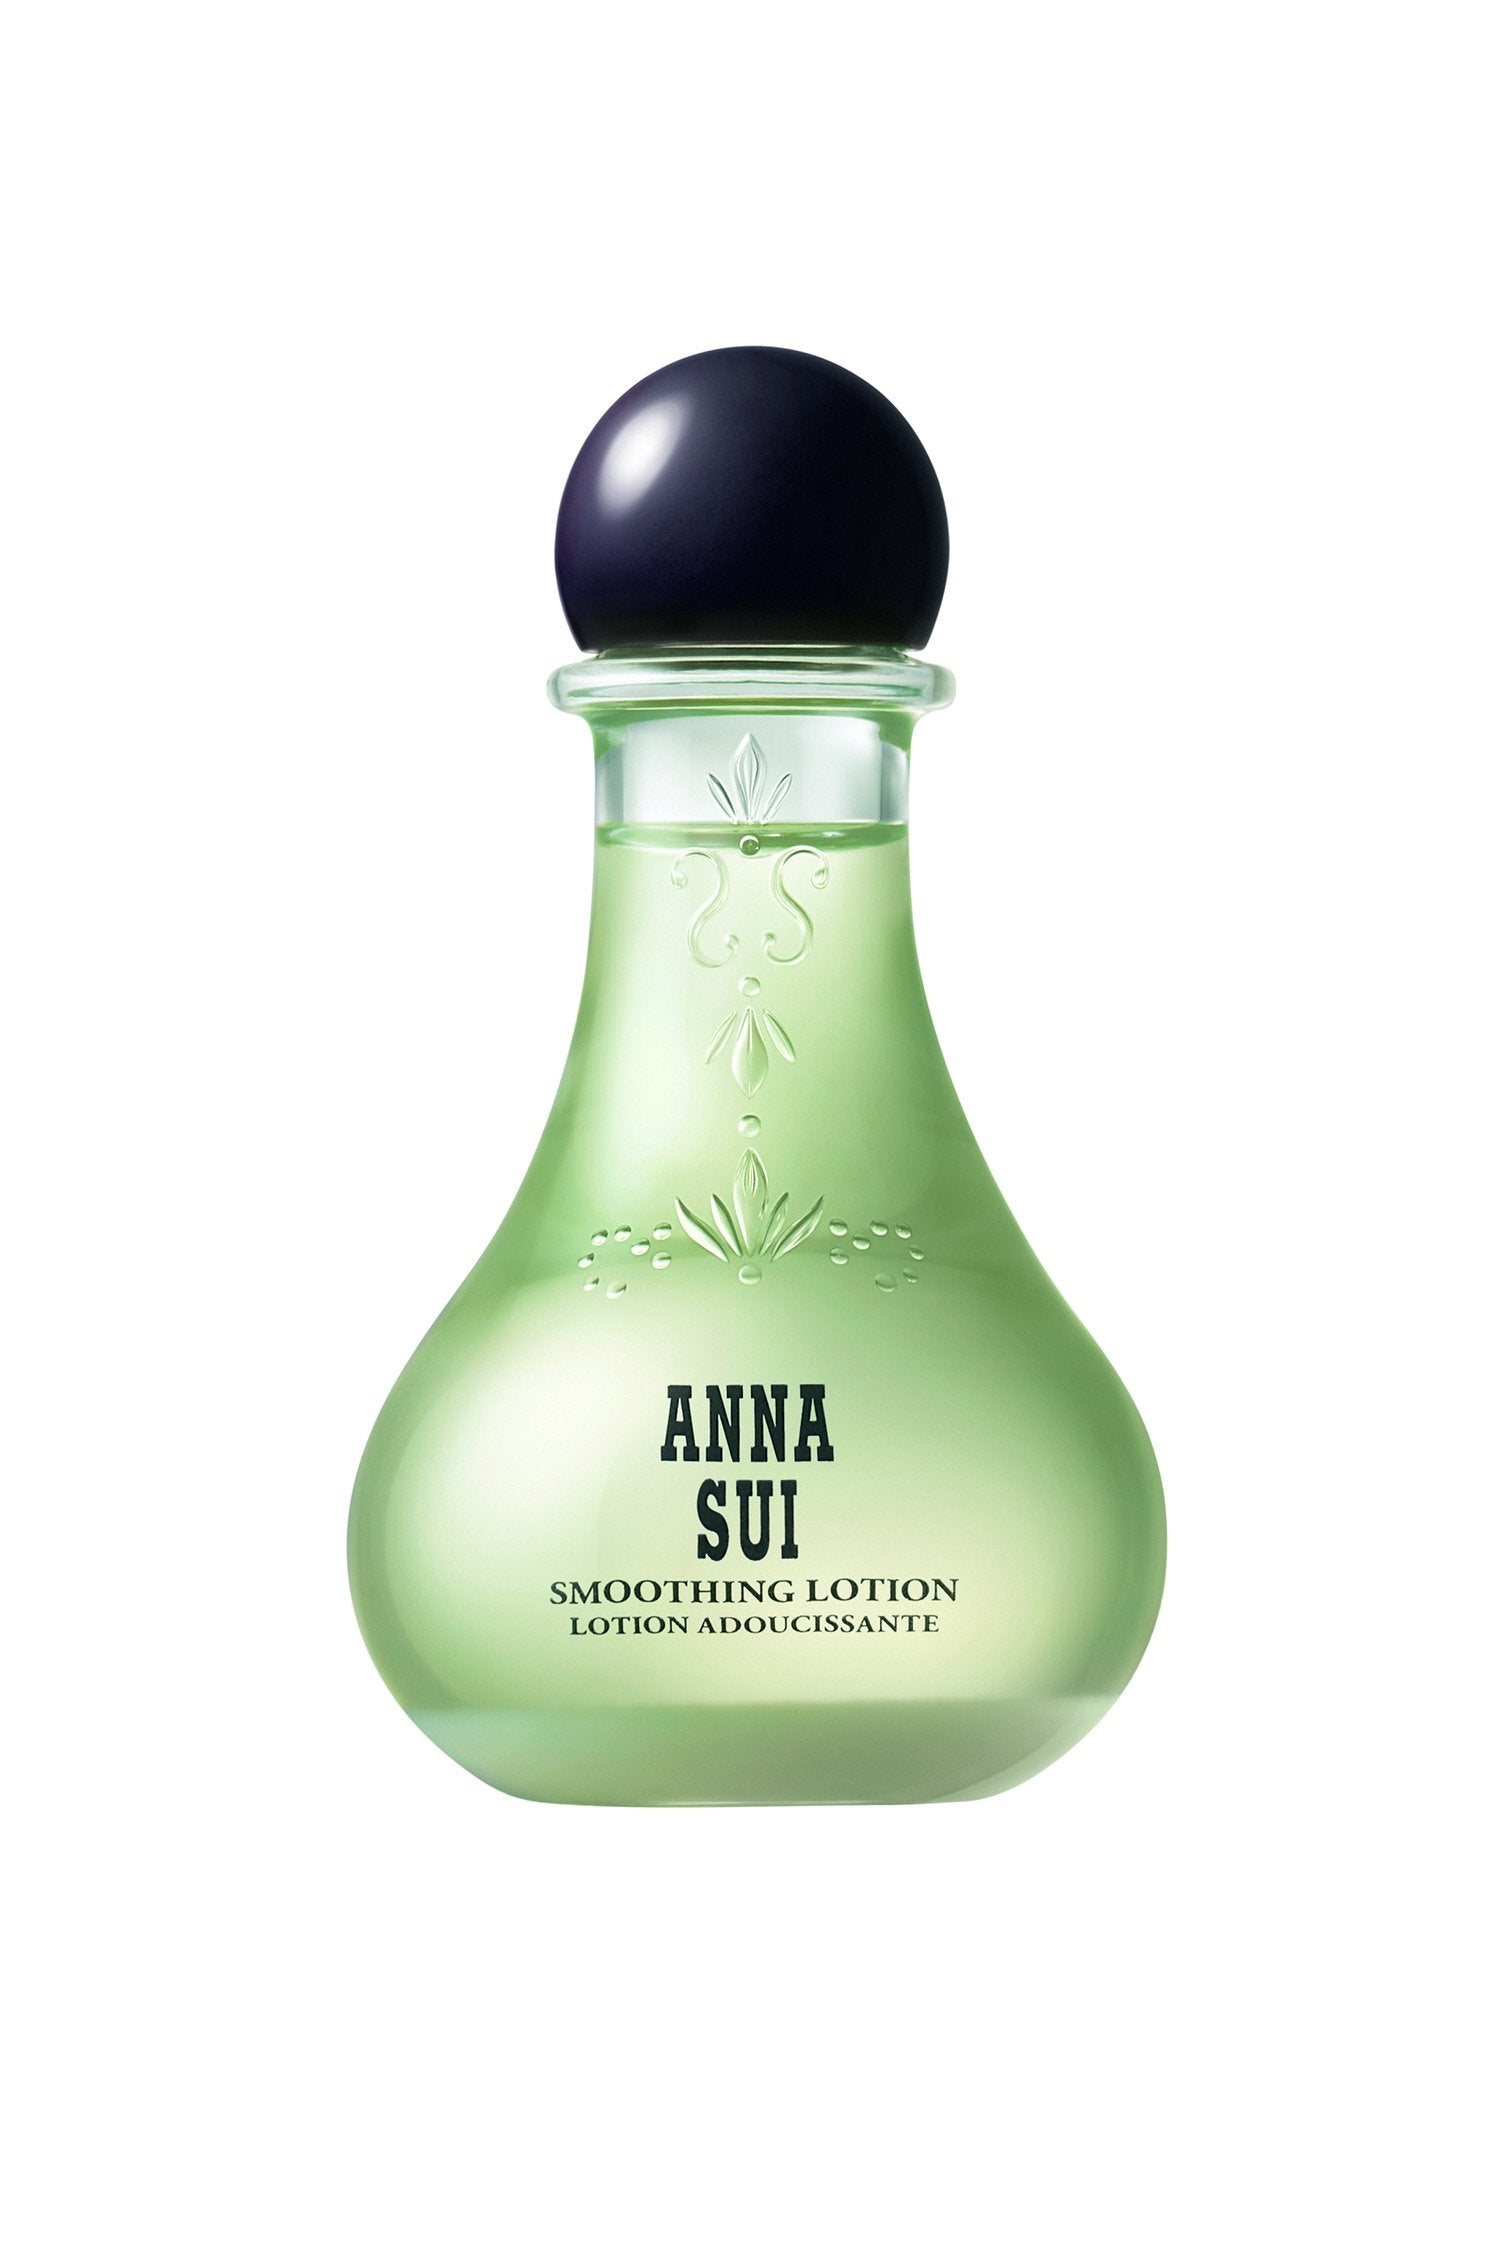 In a transparent green, bulb-shaped container, floral design and Anna branding, a round cap on top